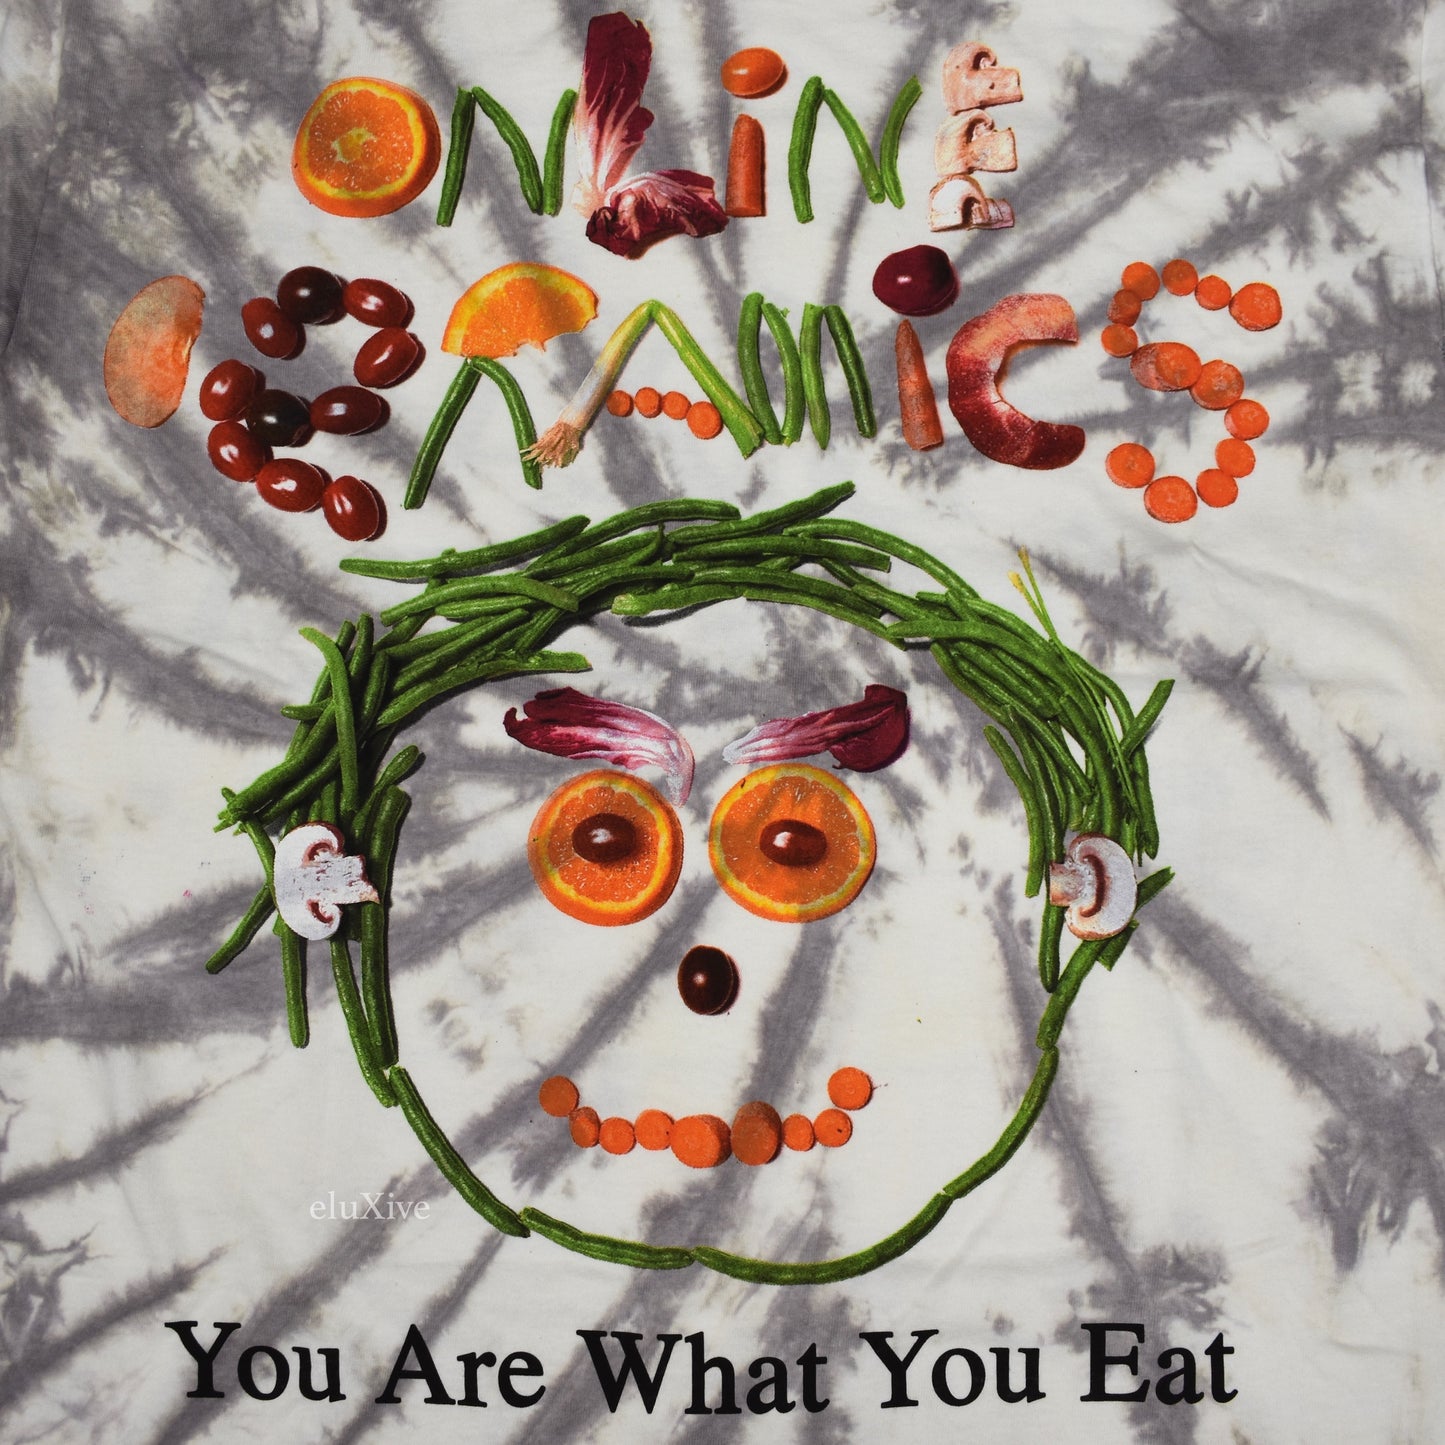 Online Ceramics - You Are What You Eat Tie-Dye T-Shirt